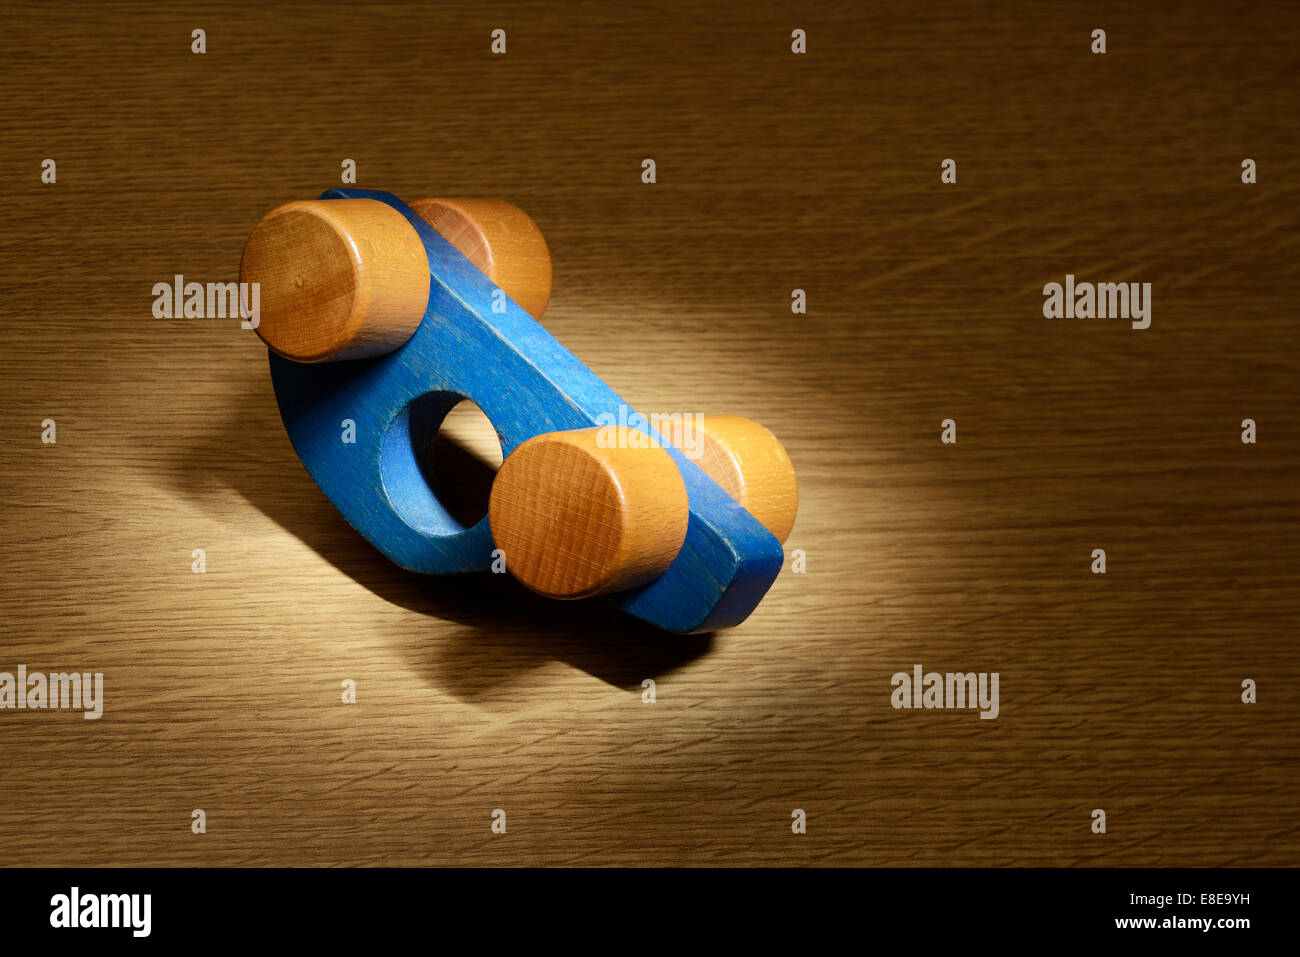 Spotlight on an upside down blue toy wooden car Stock Photo